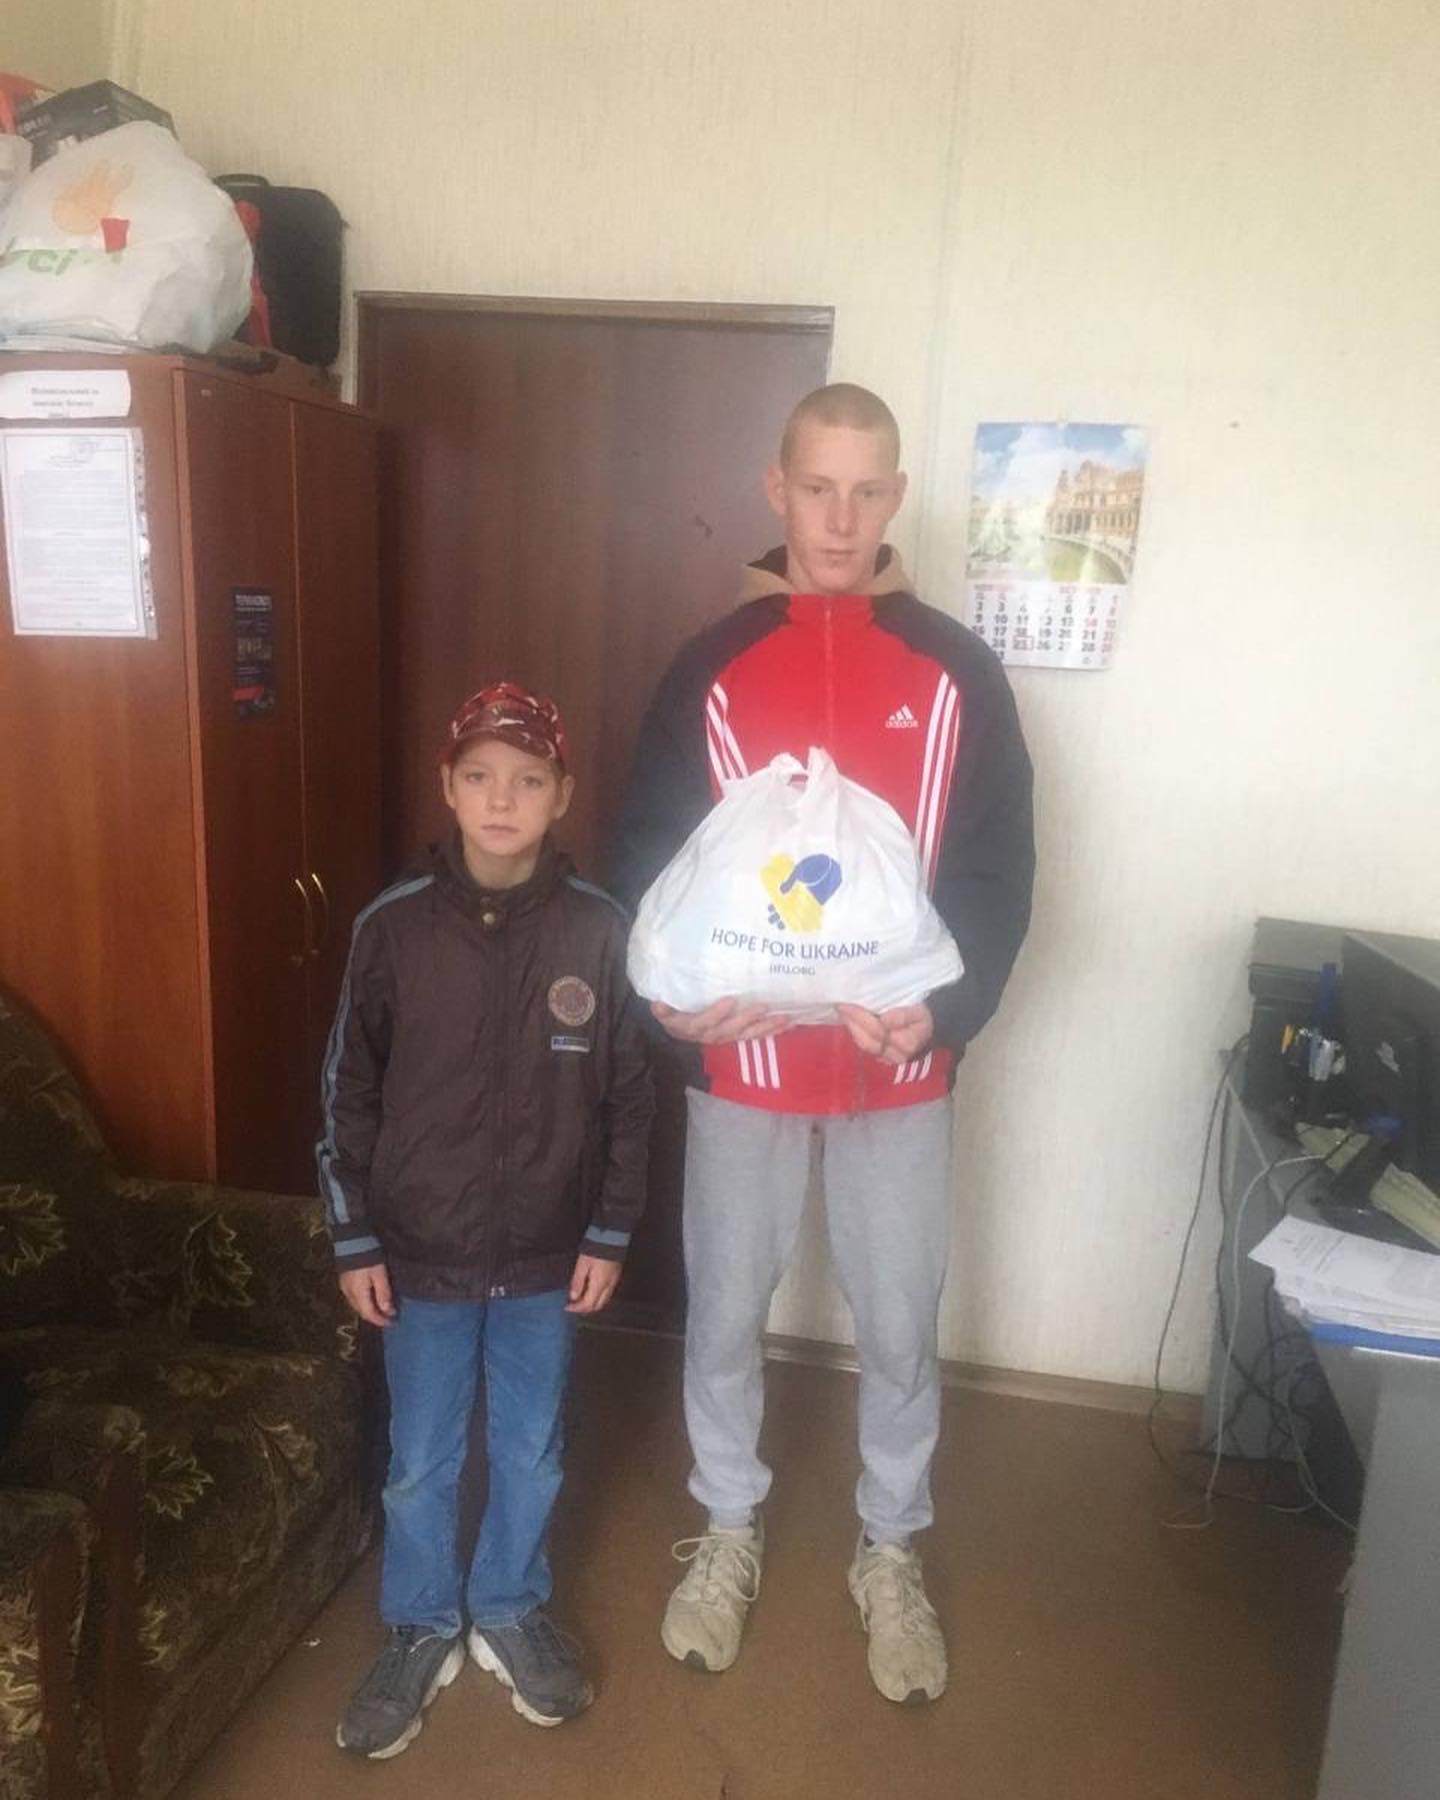 A man and a boy standing next to each other holding a bag.